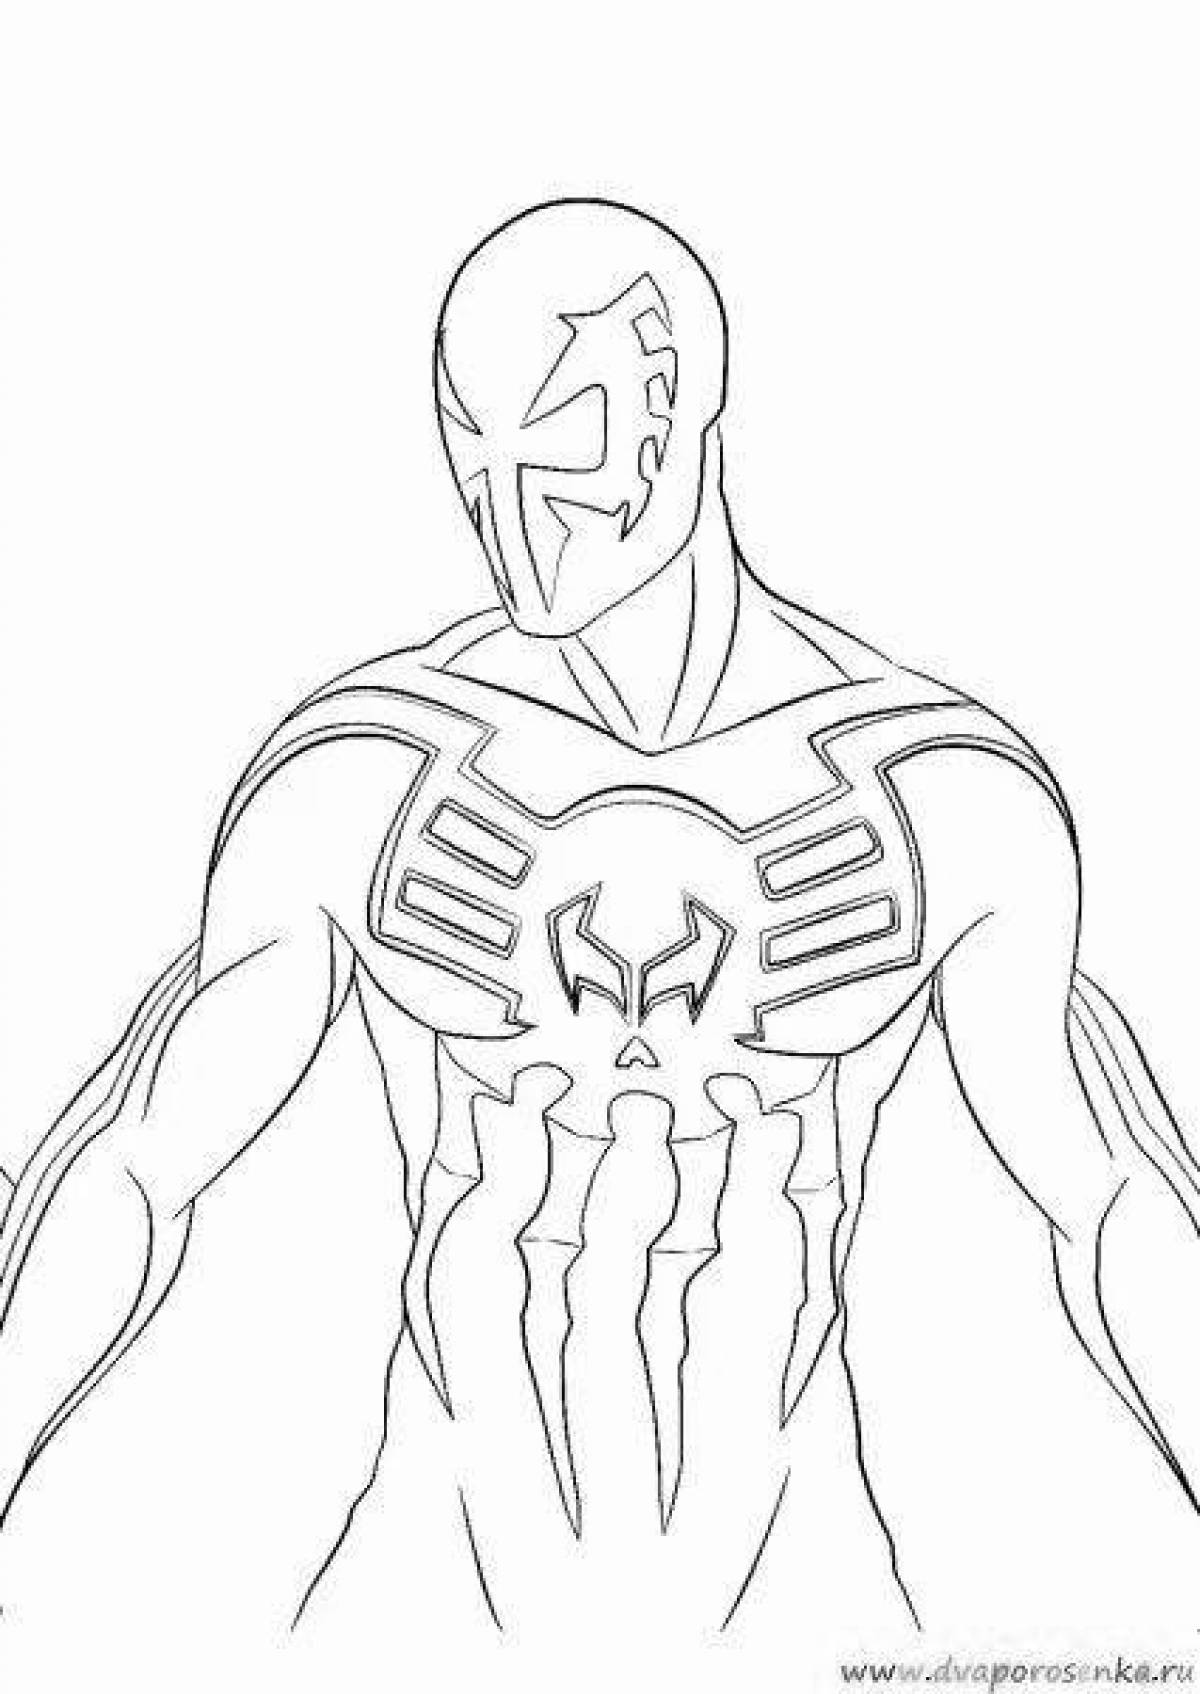 Playful iron spider coloring page